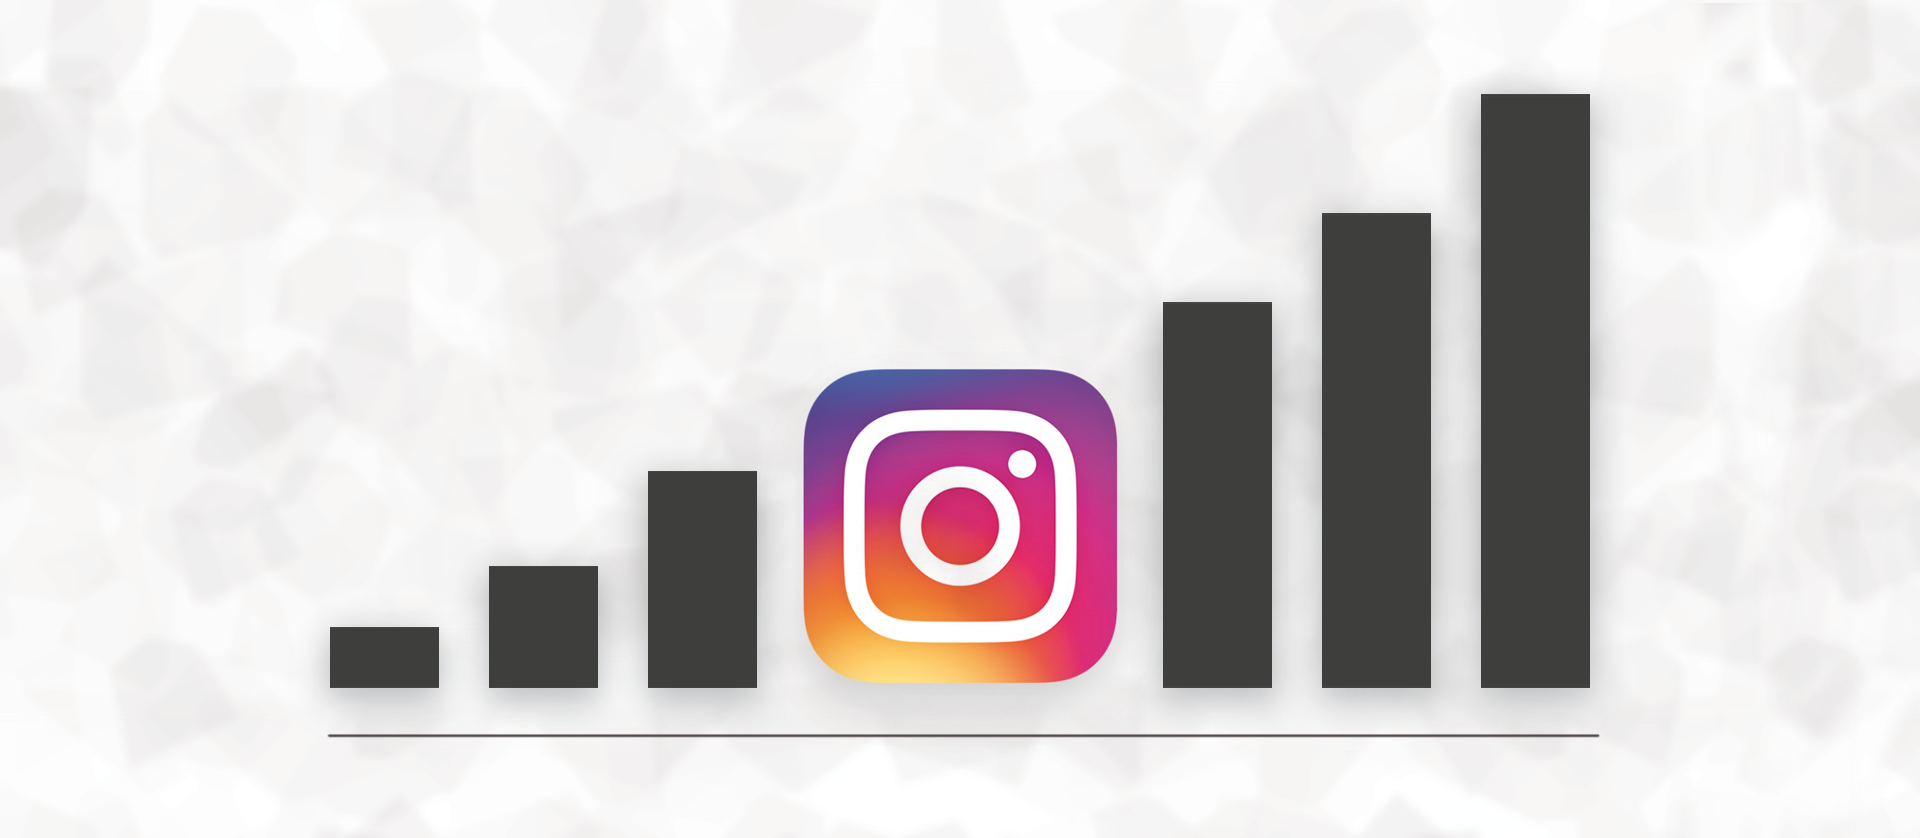 My open source Instagram bot got me 2,500 real followers ... - 1920 x 838 png 473kB